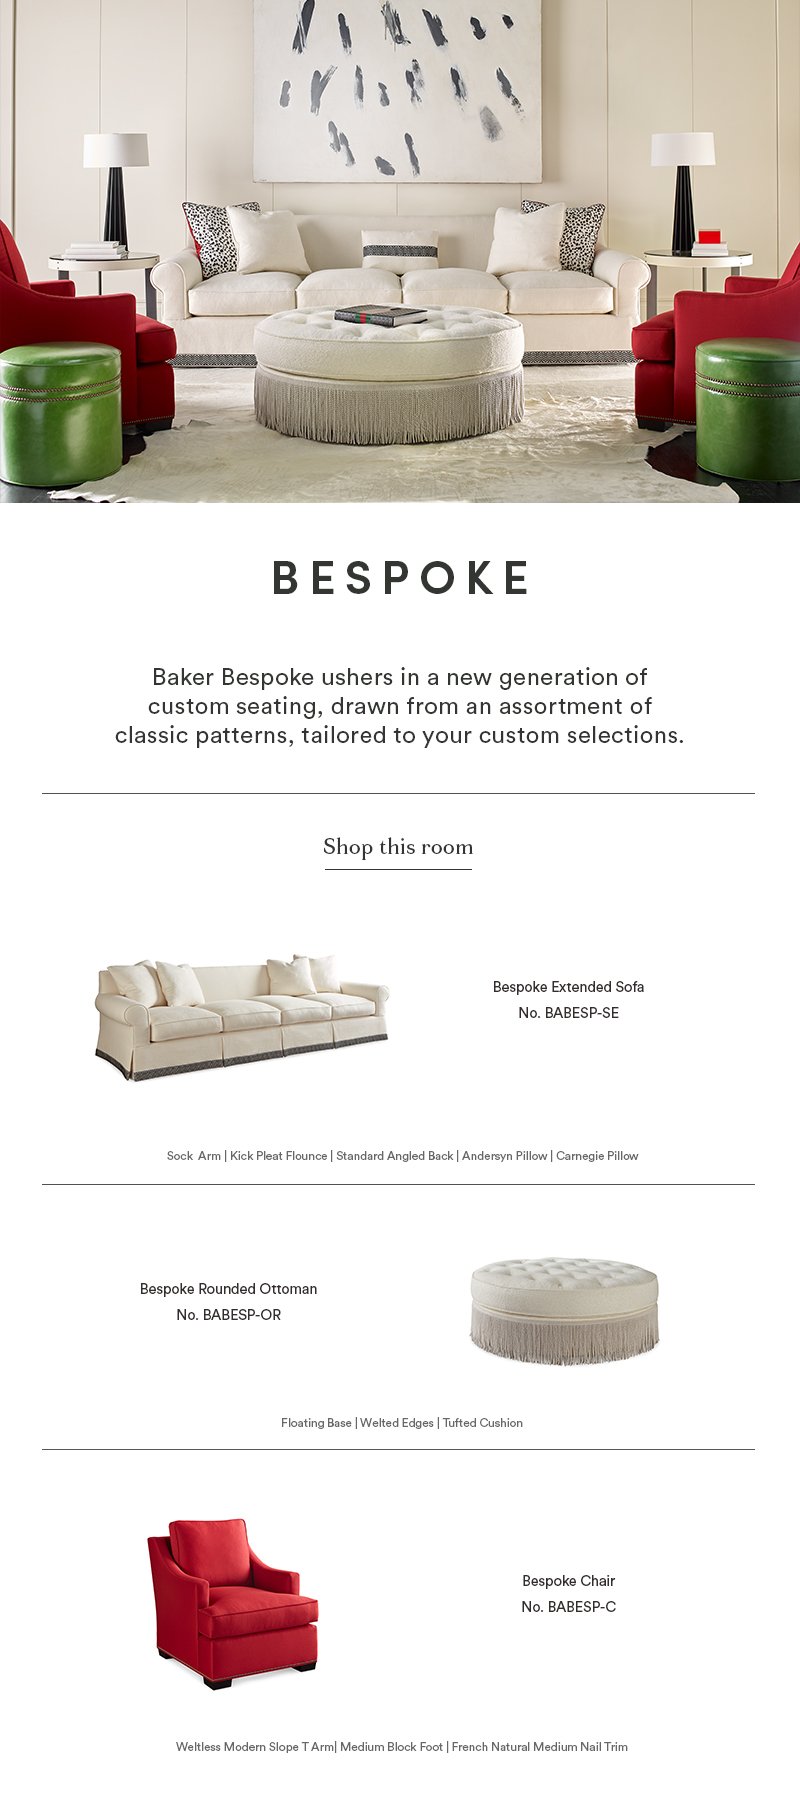 Bespoke: Baker Bespoke ushers in a new generation of custom seating, drawn from an assortment of classic patterns, tailored to your custom selections.  |  Shop this Room  |  Bespoke Extended Sofa No. BABESP-SE: Sock Arm, Kick Pleat Flounce, Standard Angled Back, Andersyn Pillow, Carnegie Pillow  |  Bespoke Rounded Ottoman No. BABESP-OR: Floating Base, Welted Edges, Tufted Cushion  |  Bespoke Chair No. BABESP-C: Weltless Modern Slope T Arm , Medium Block Foot, French Natural Medium Nail Trim